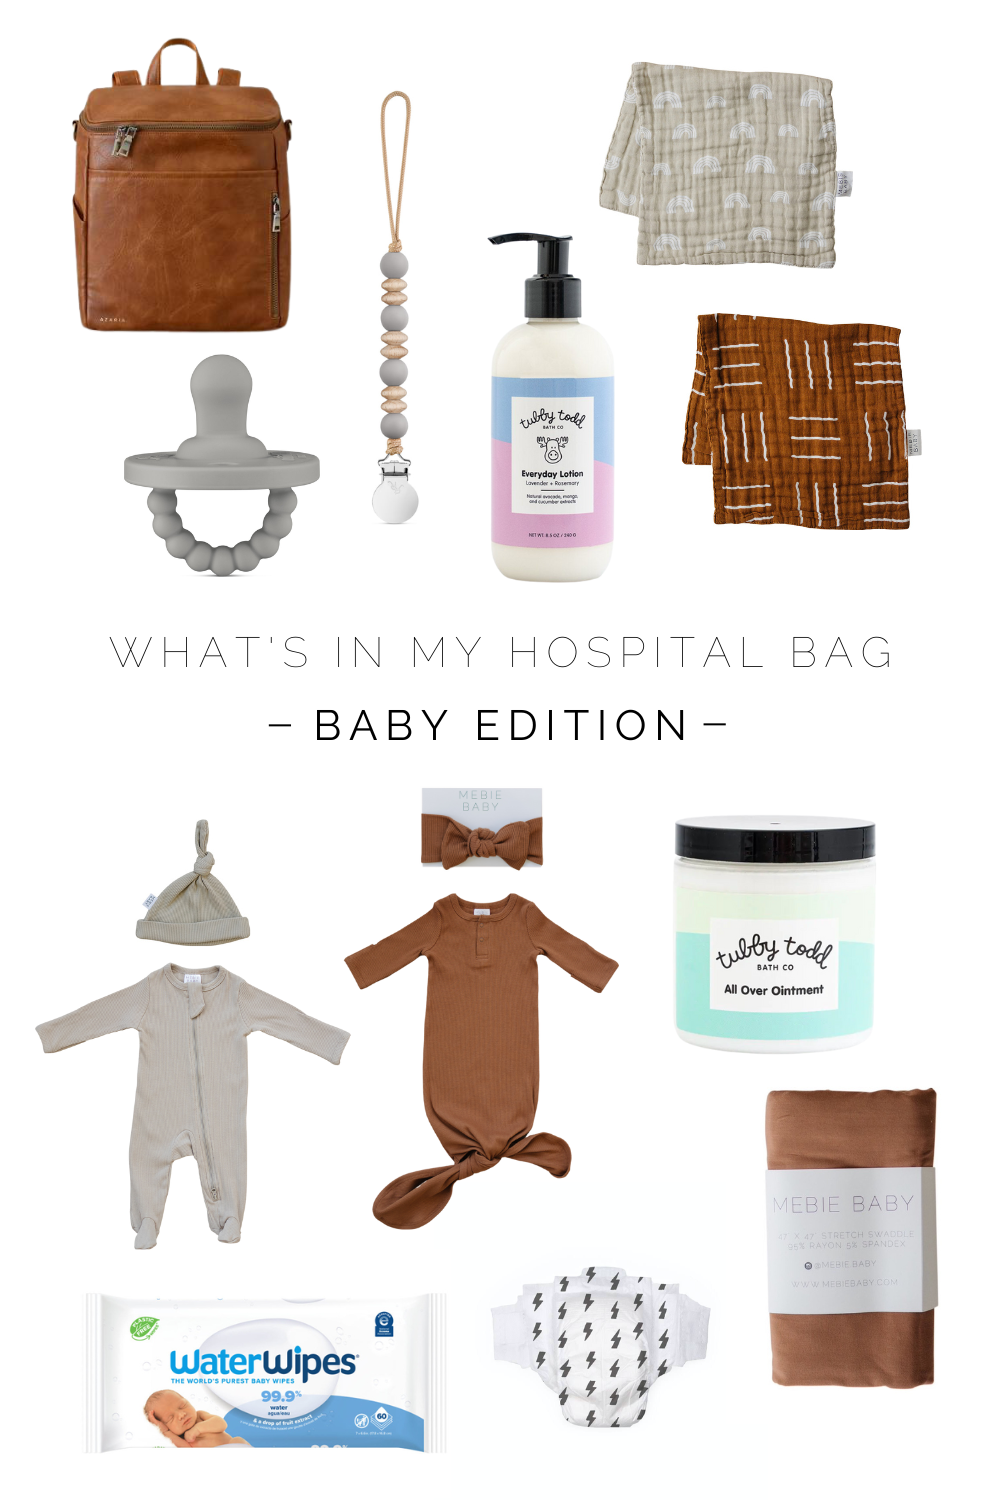 What's in My Hospital Bag? Baby Edition